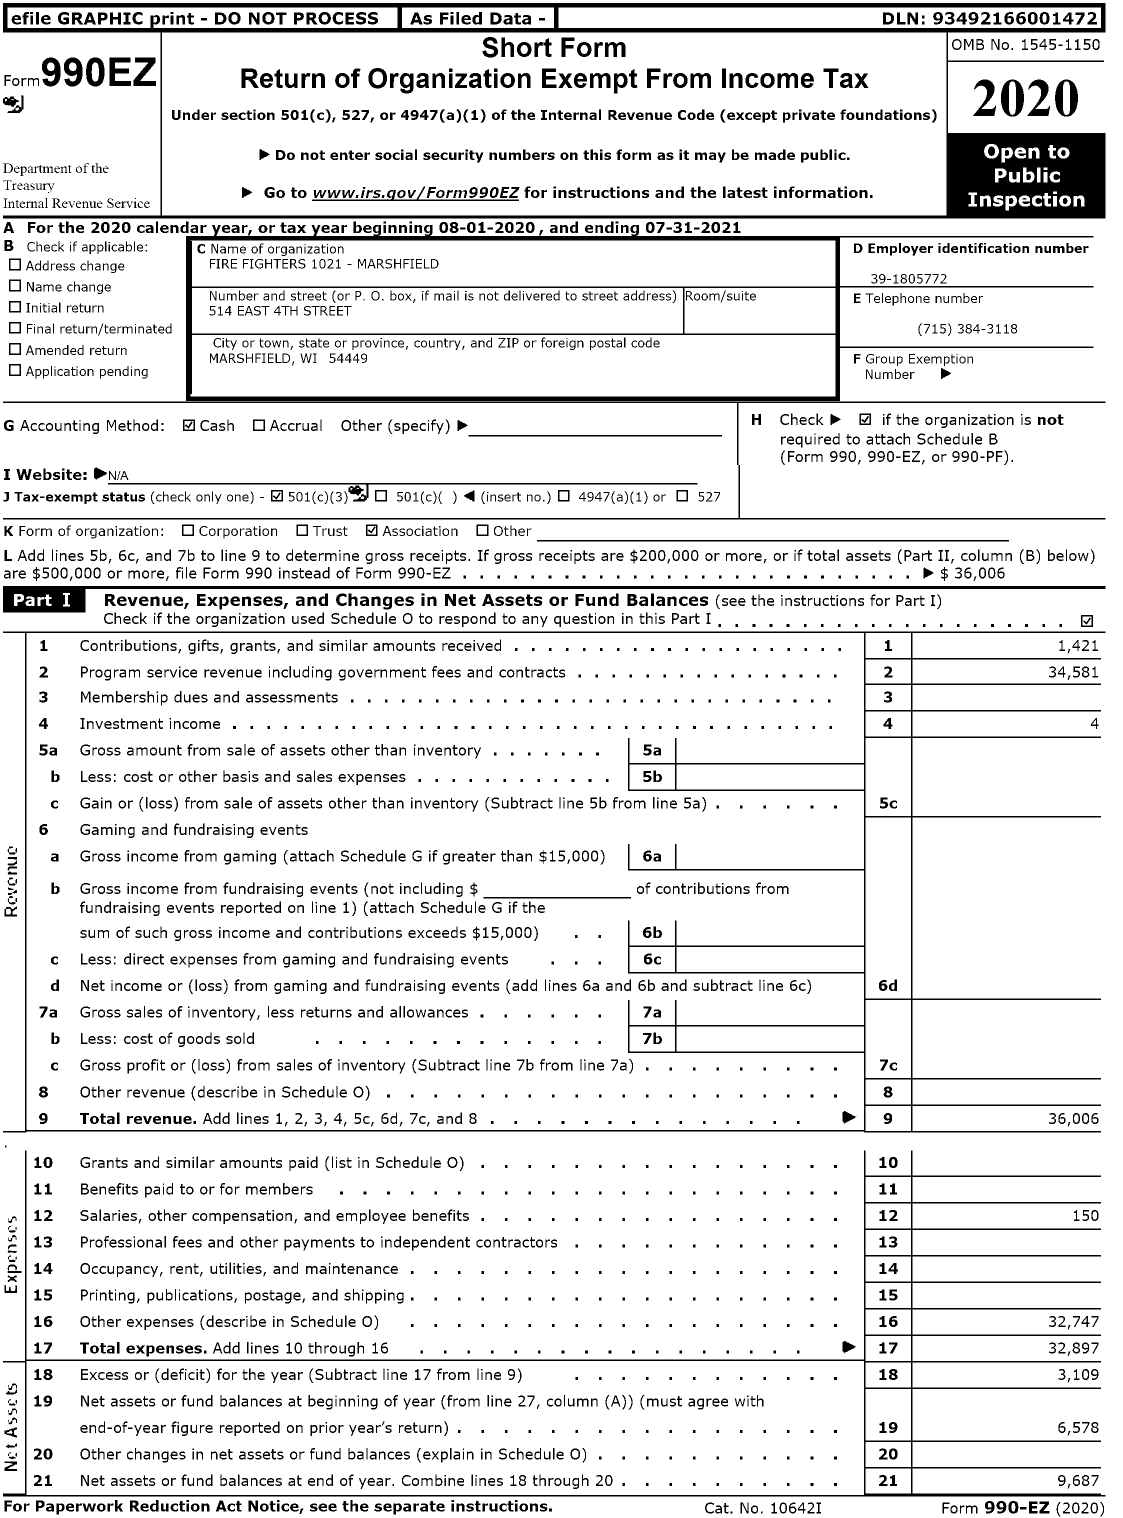 Image of first page of 2020 Form 990EZ for Fire Fighters 1021 - 1021-marshfield